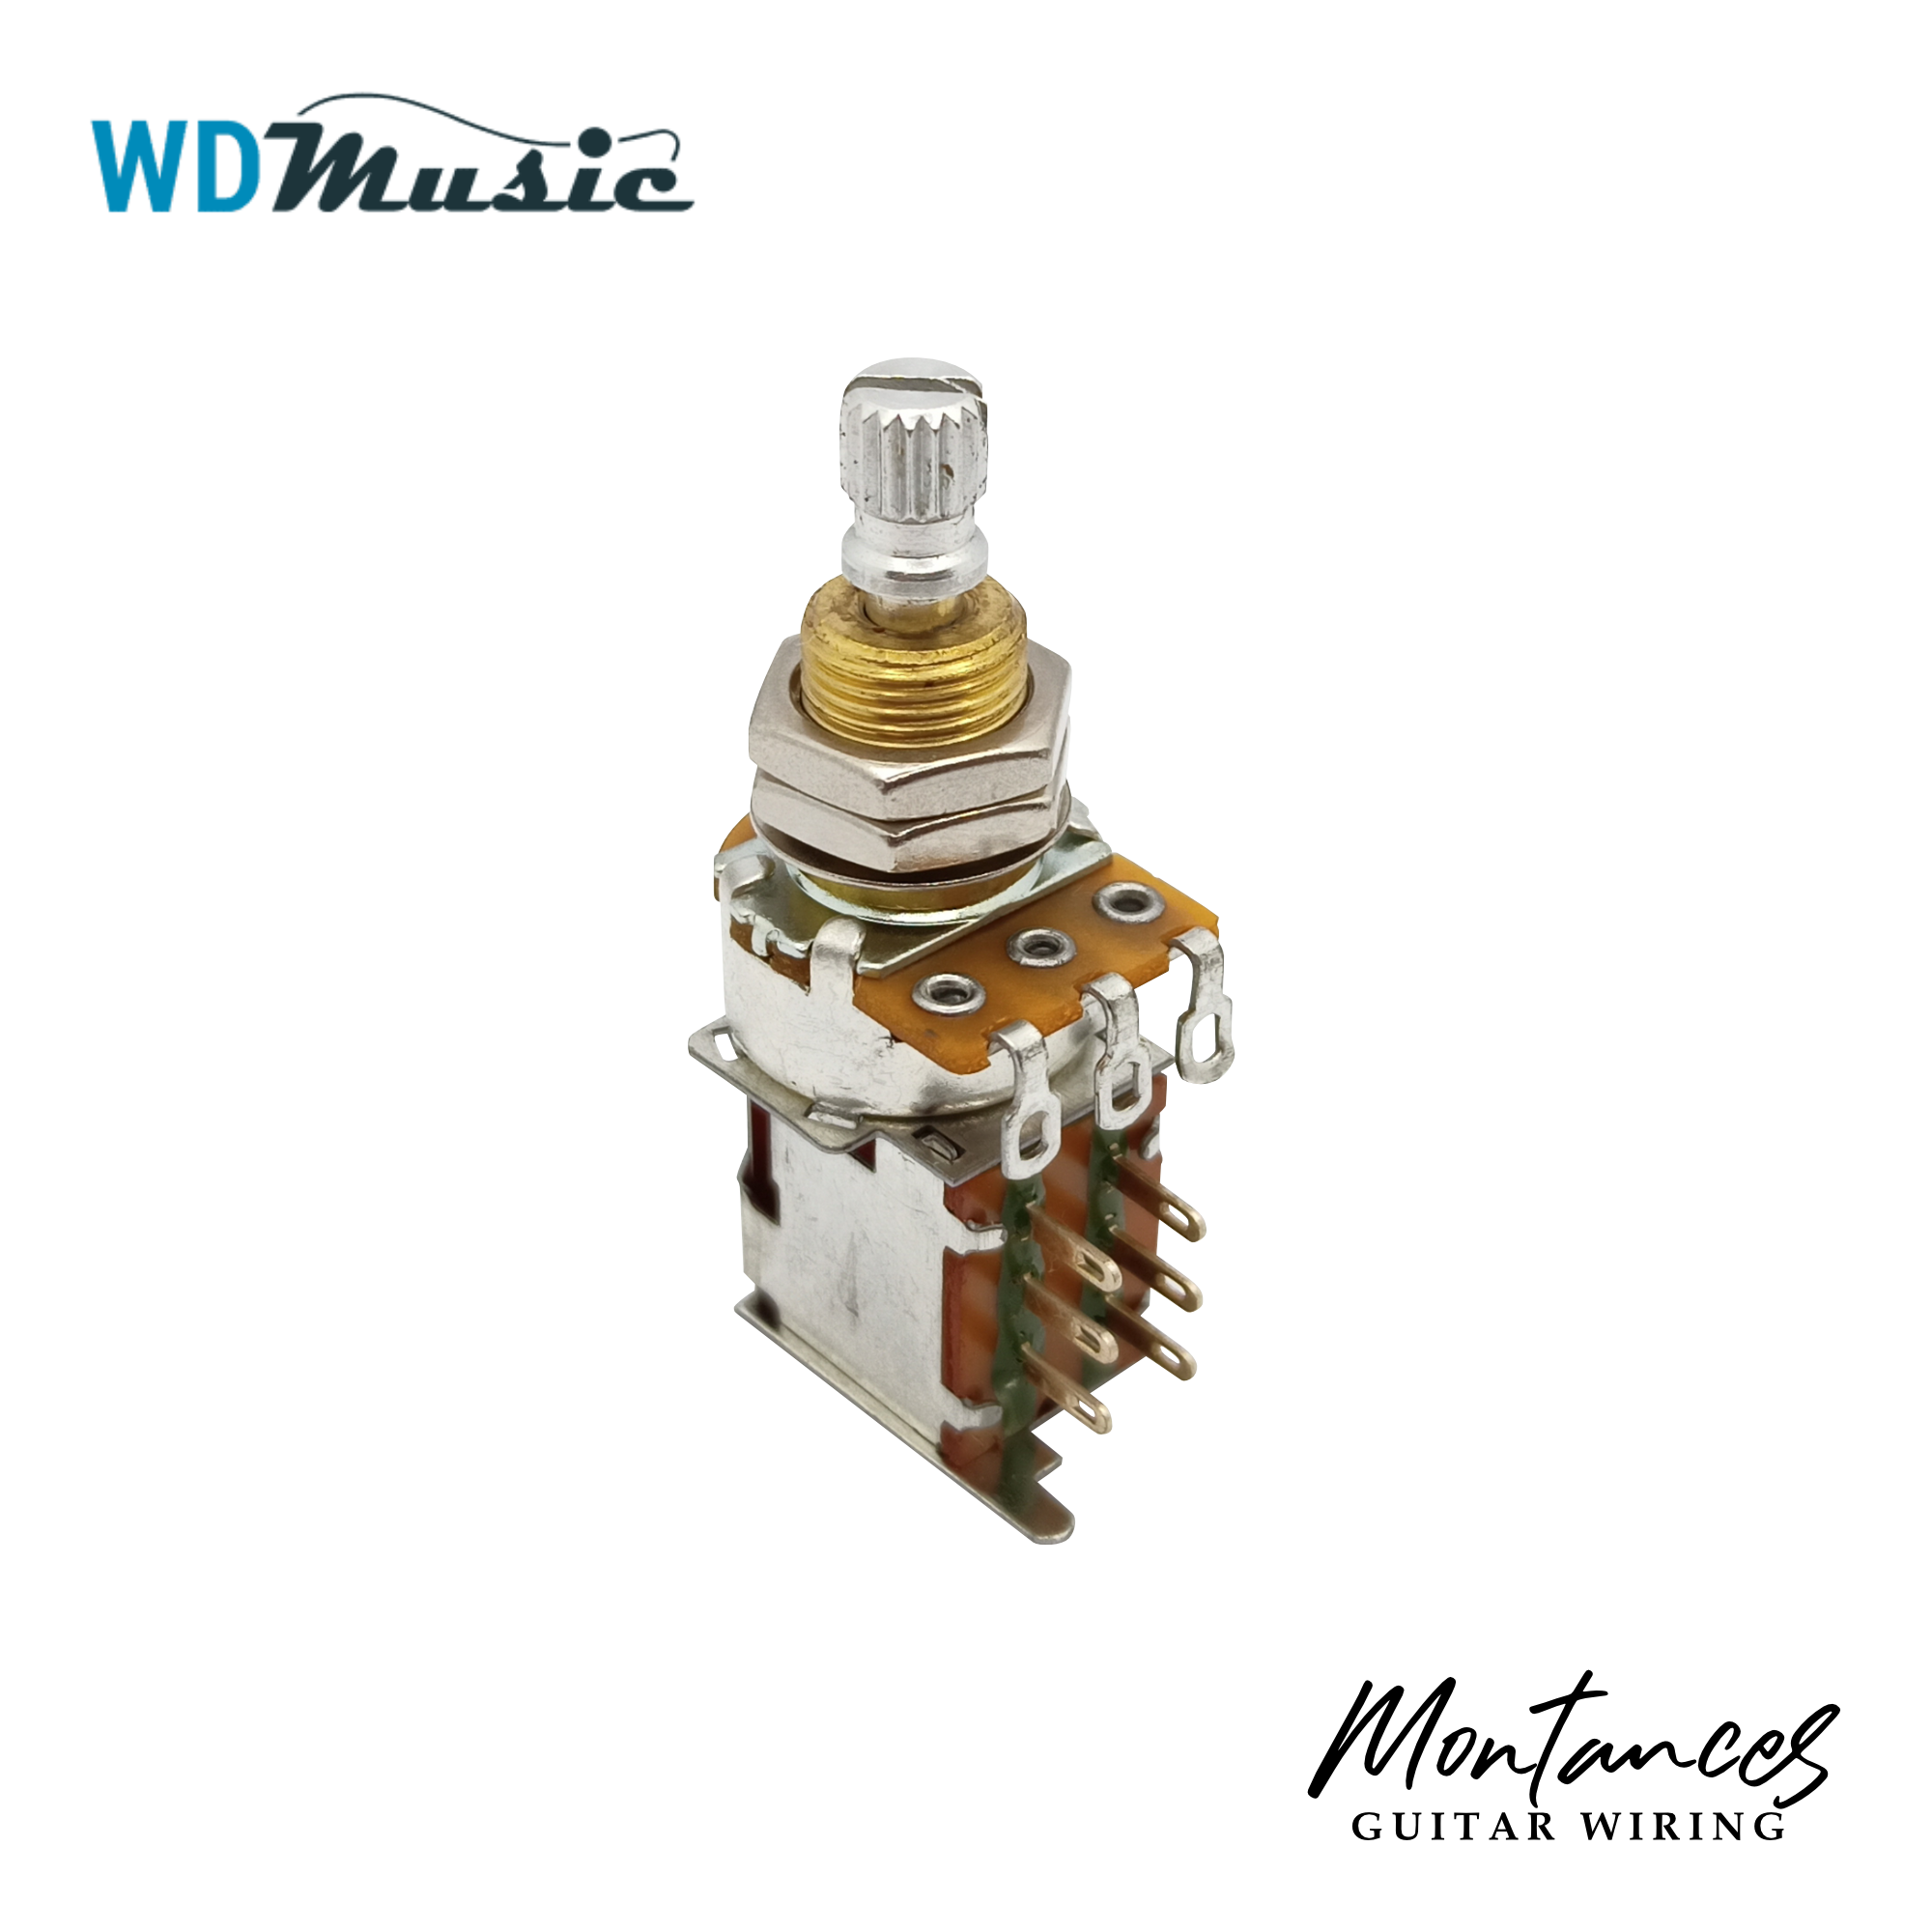 WD® ⅜” Standard Length Push Push Potentiometer Made in USA